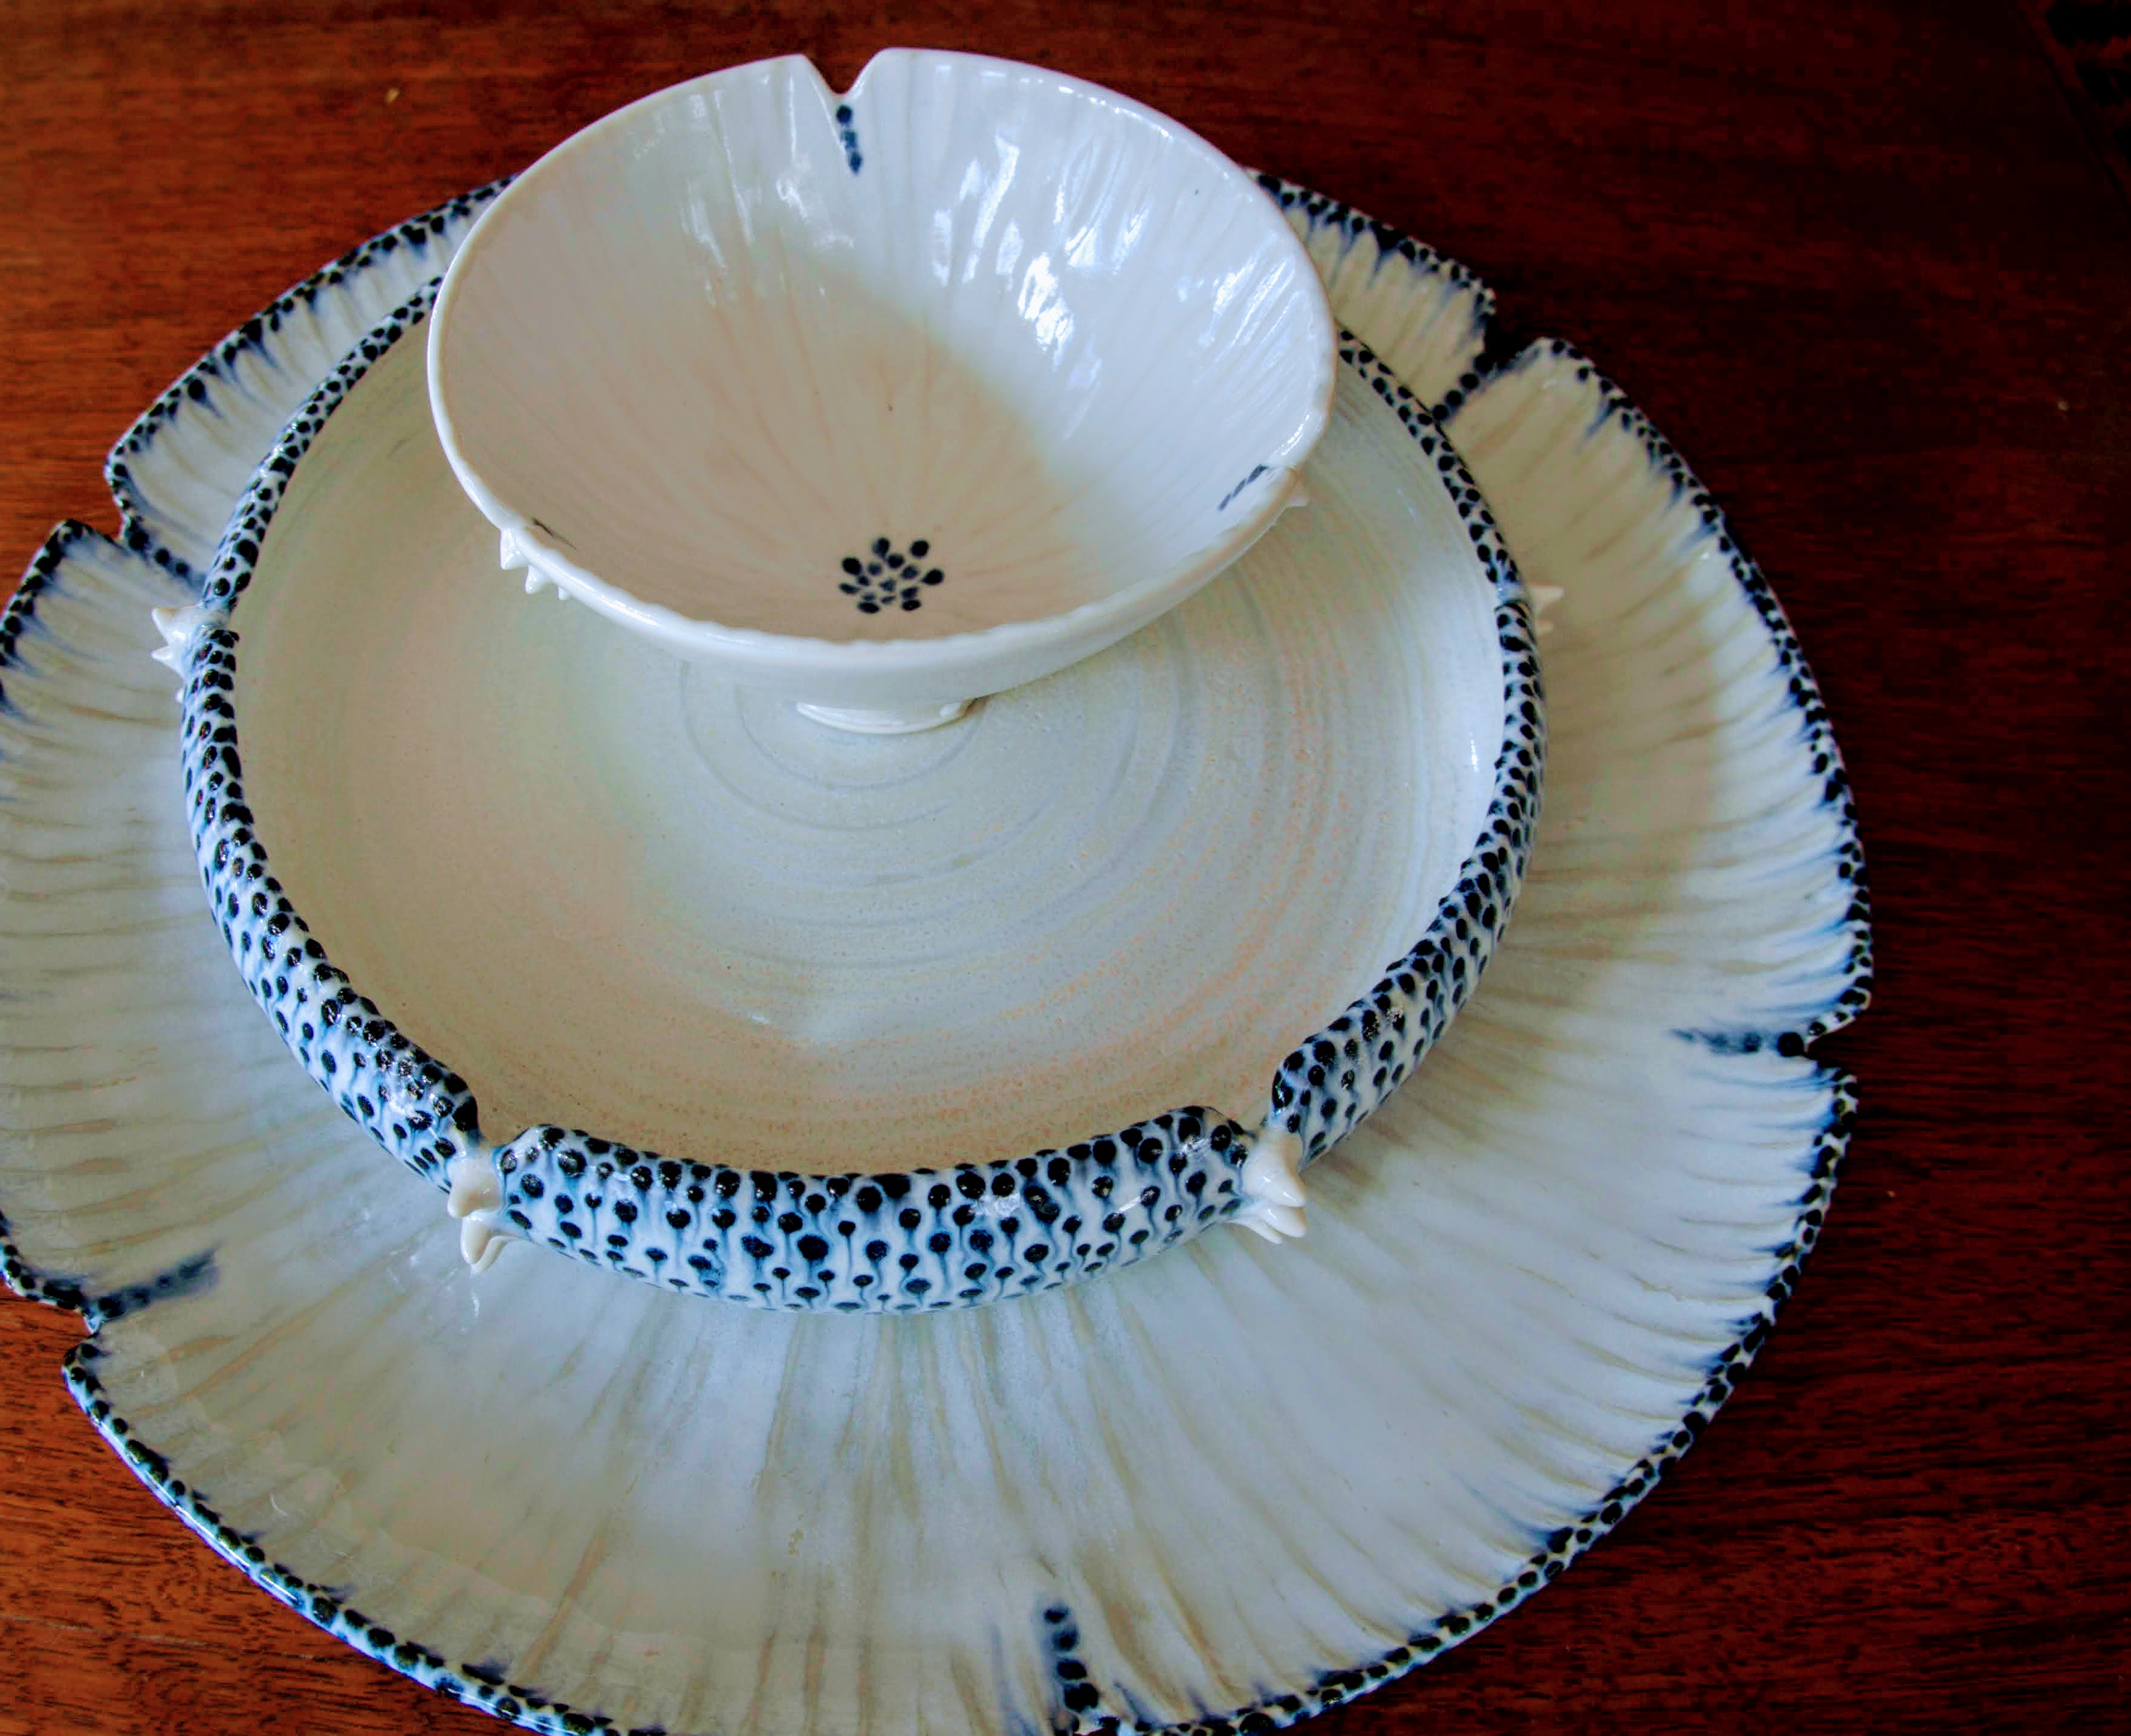 Tini Pinto’s bowl and plate set, dinner plate 11 in. (28 cm); salad bowl 8 in. (20 cm); condiment bowl 4 in. (10 cm) in diameter, wheel-thrown porcelain, fired to cone 6 in an electric kiln. 